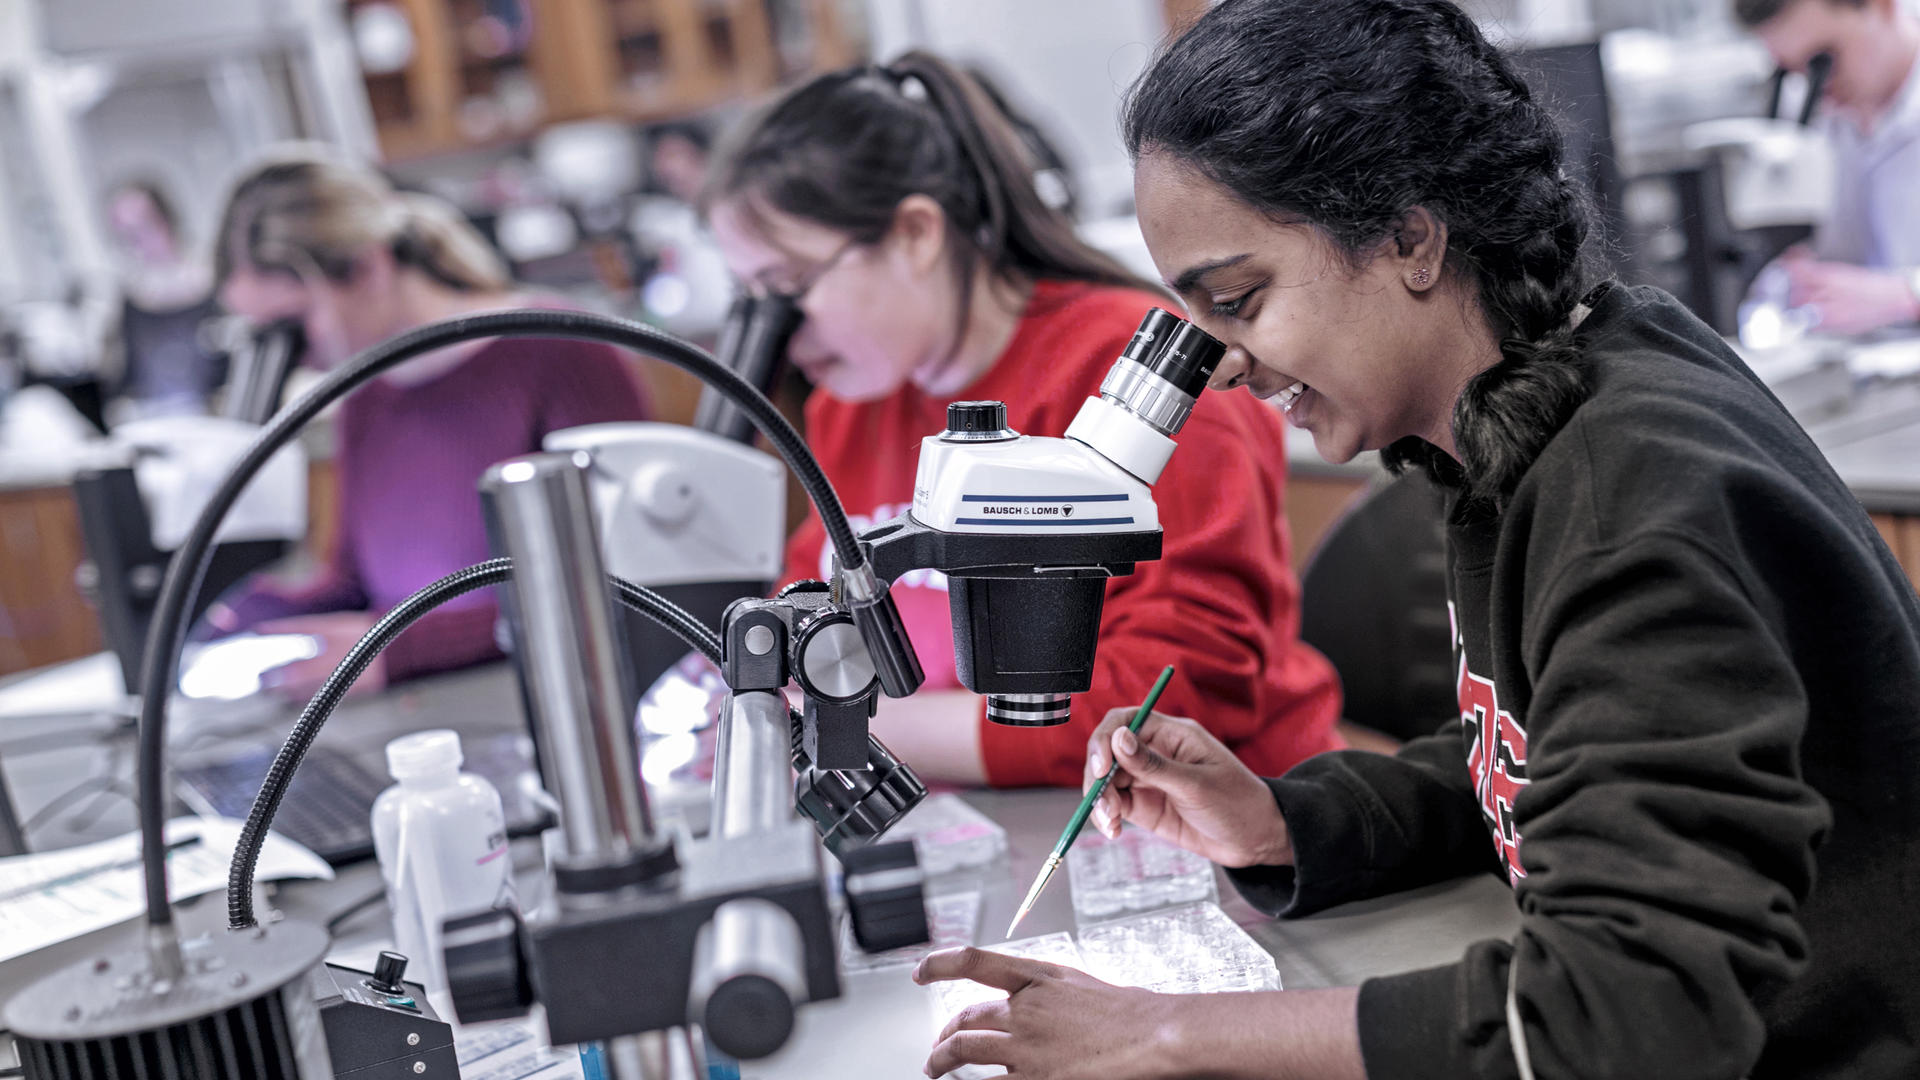 students looking through microscopes in a lab